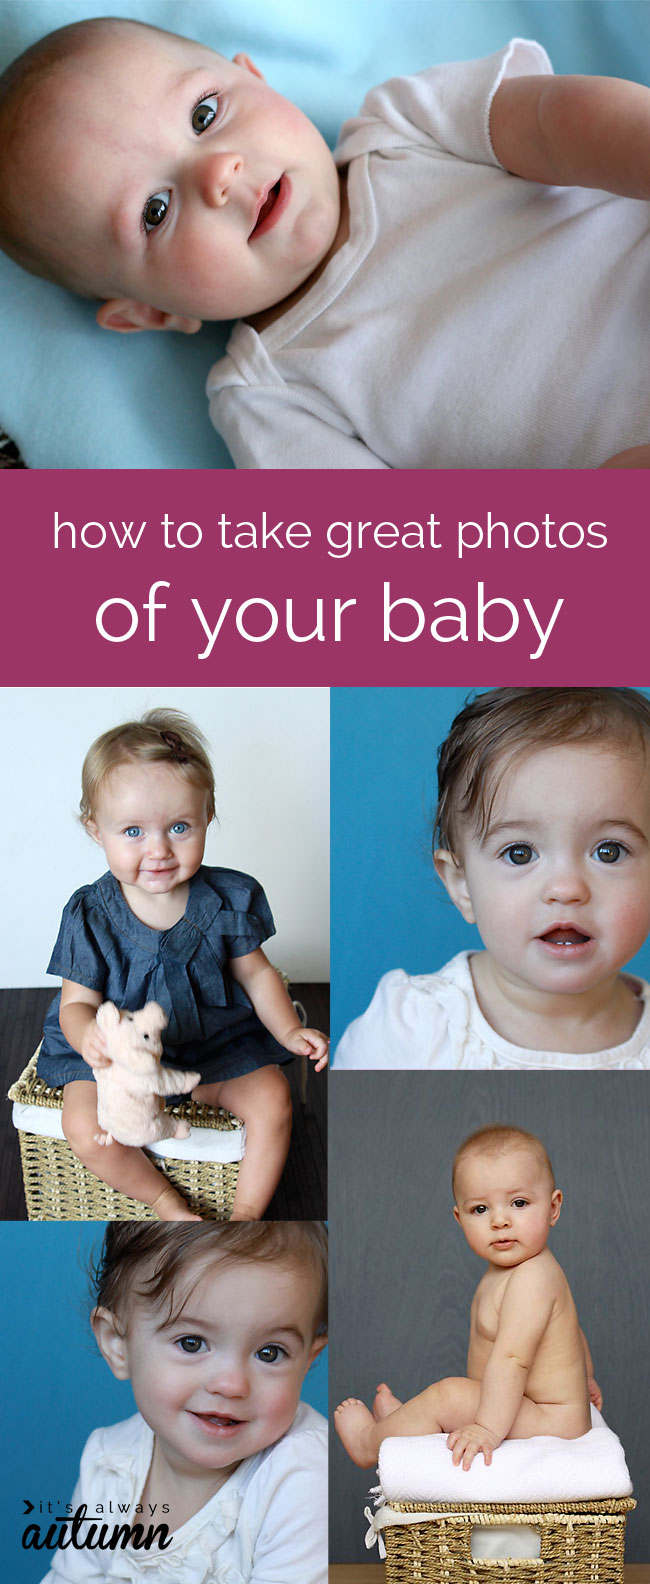 collage of baby photos - how to take great photos of your baby